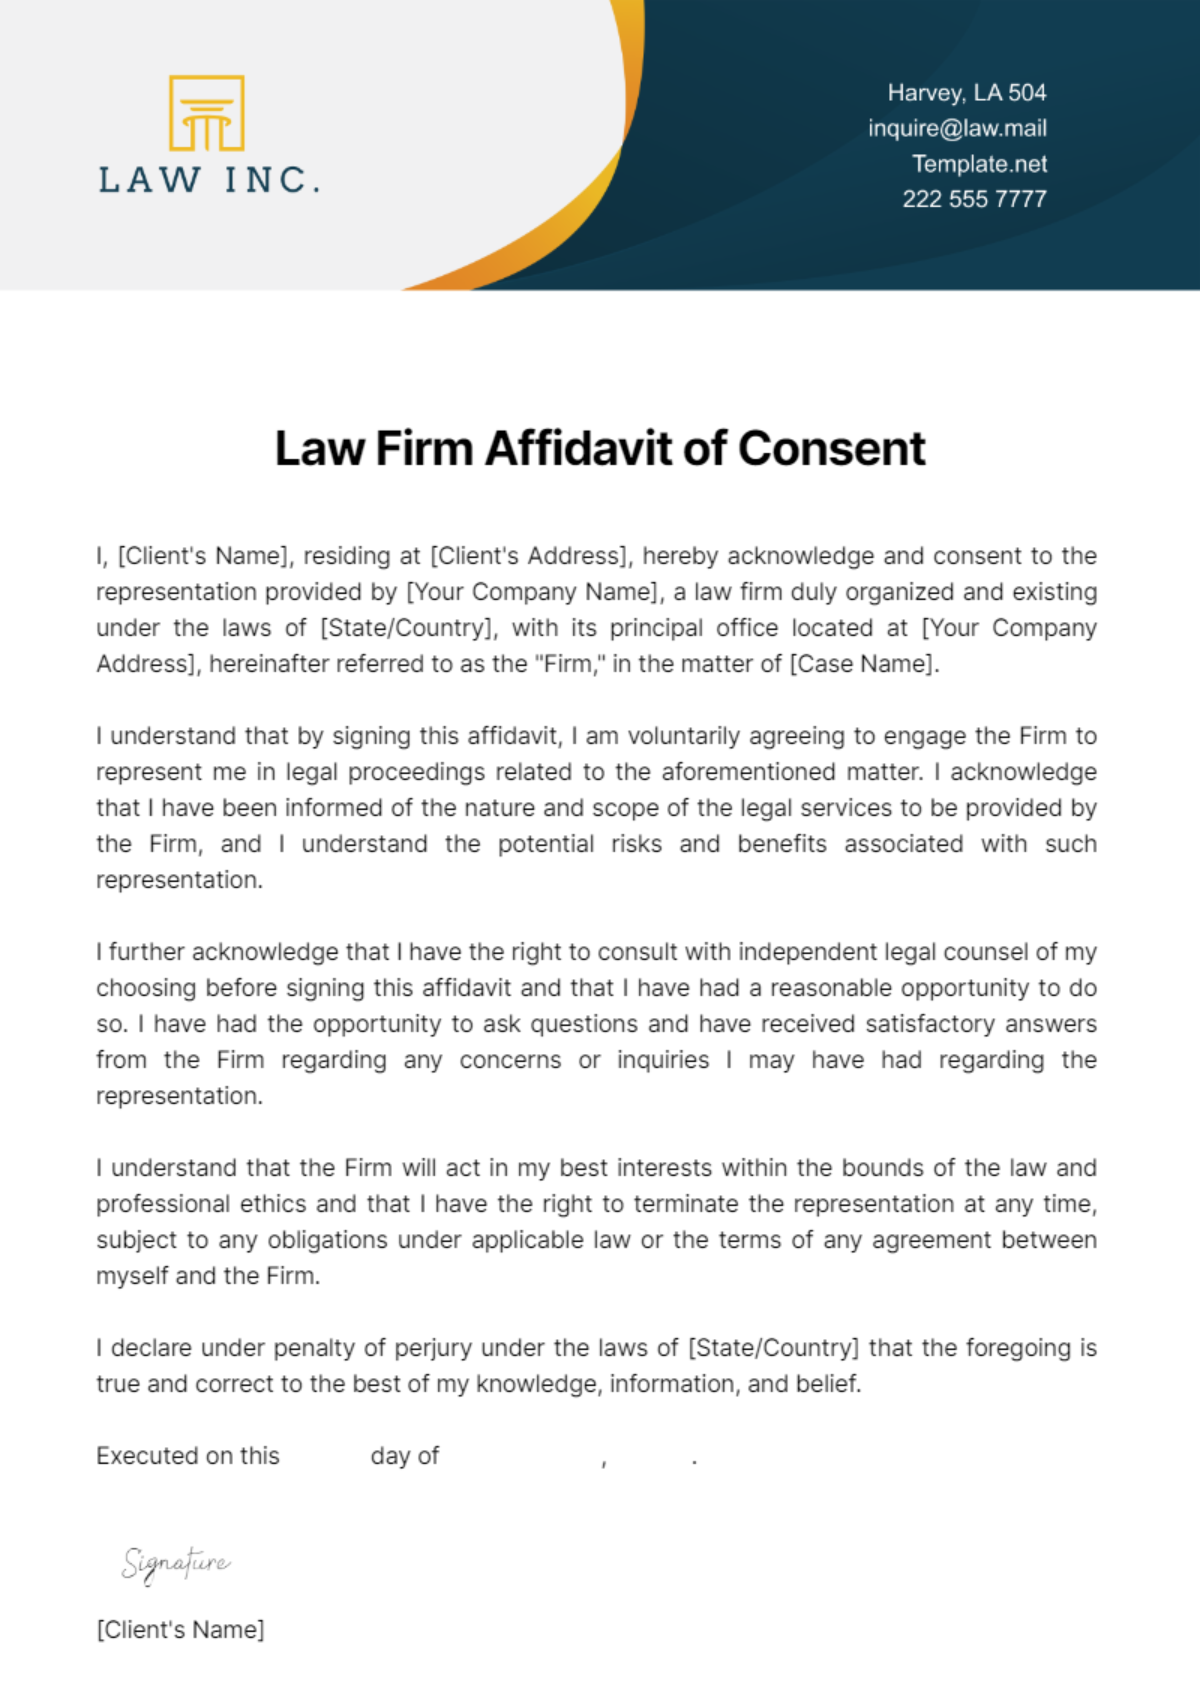 Law Firm Affidavit of Consent Template